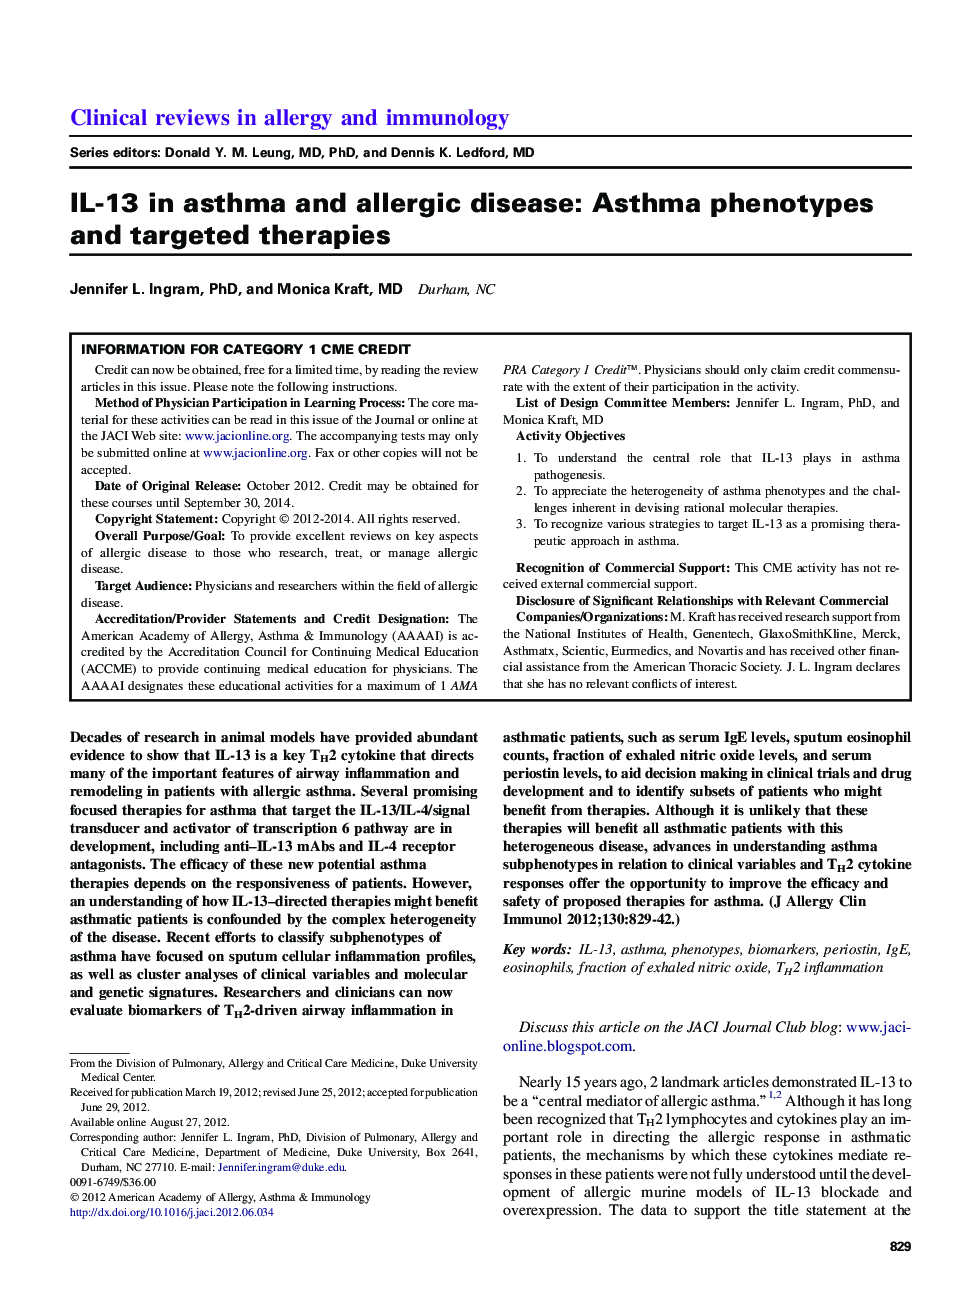 IL-13 in asthma and allergic disease: Asthma phenotypes and targeted therapies 